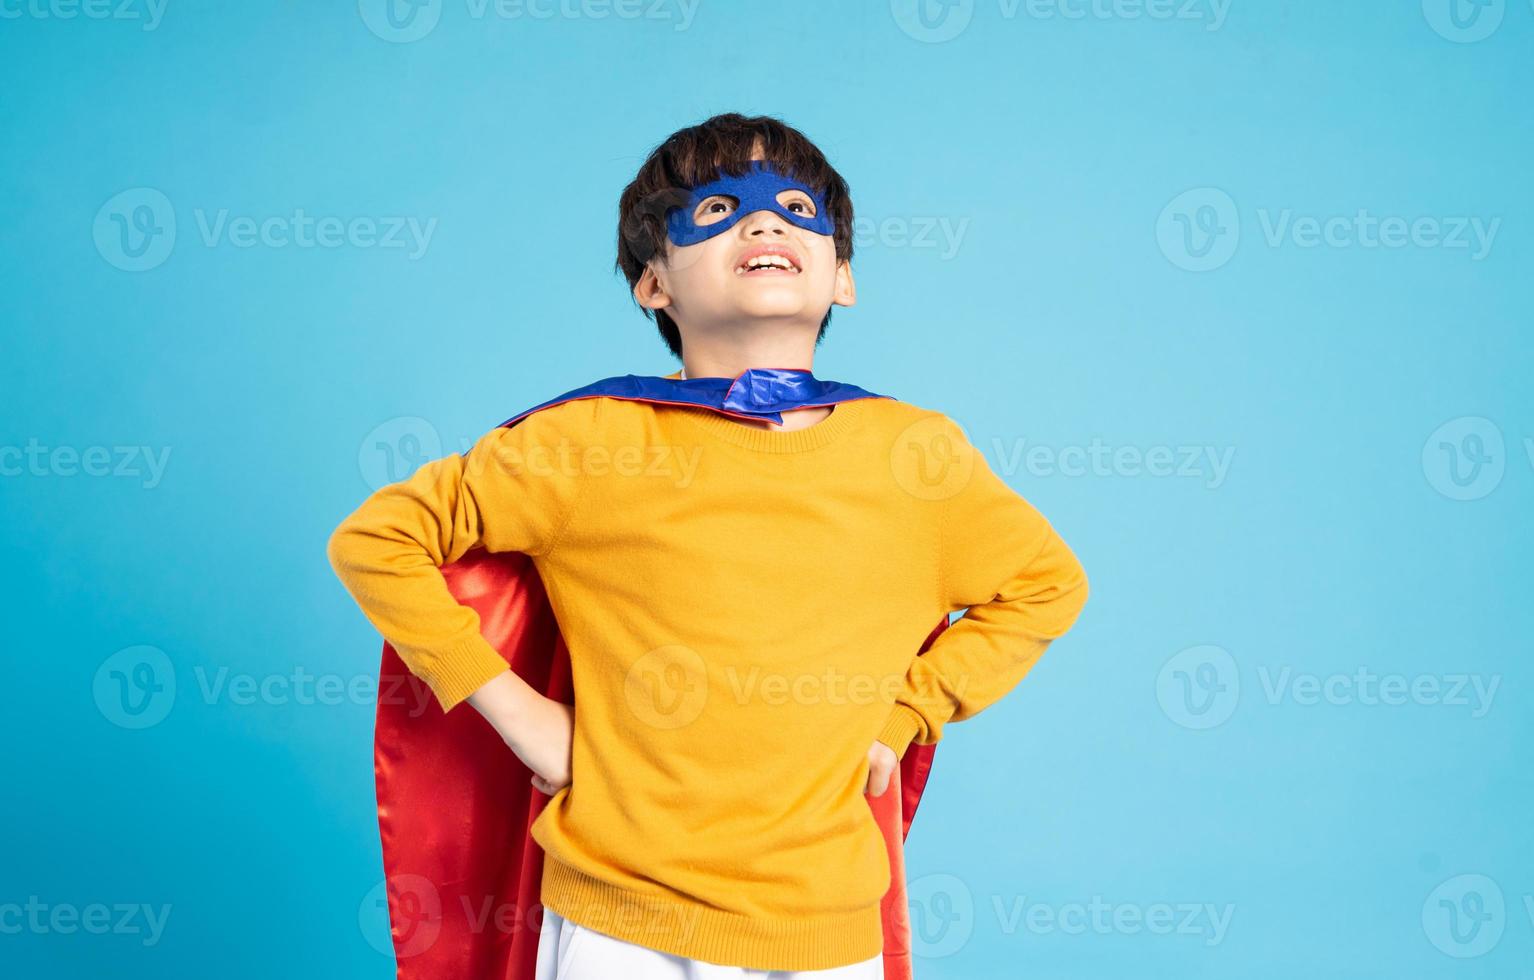 The image of a boy wearing a cape transforms into a hero photo